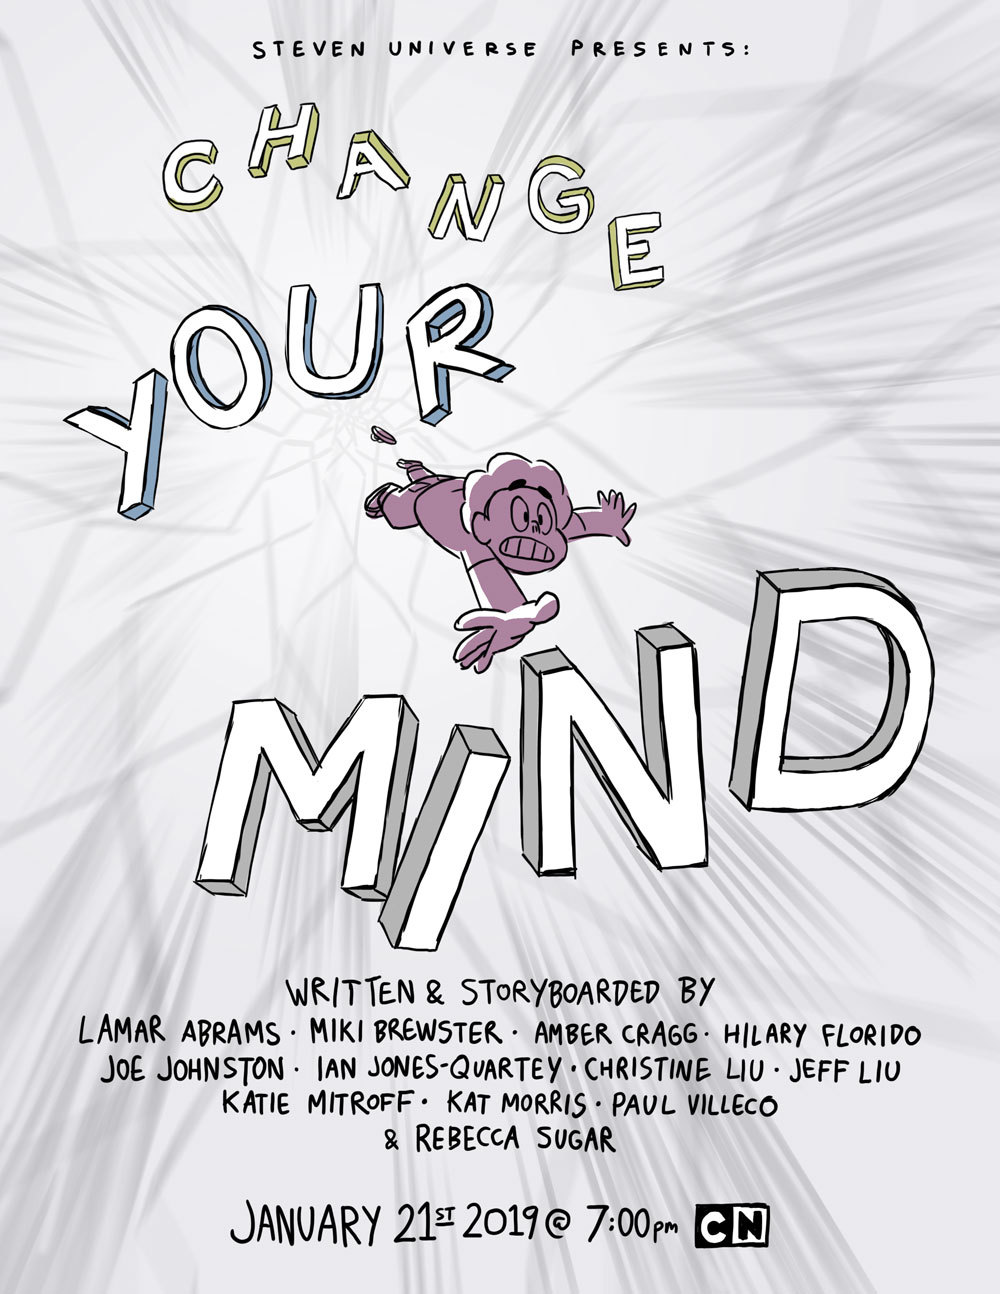 Steven Universe hour-long episode “Change Your Mind”! Airs January 21 @ 7pm! I’ve been very busy making my cartoon OK KO! but I made time to rejoin the Crewniverse for this one! Don’t miss it!